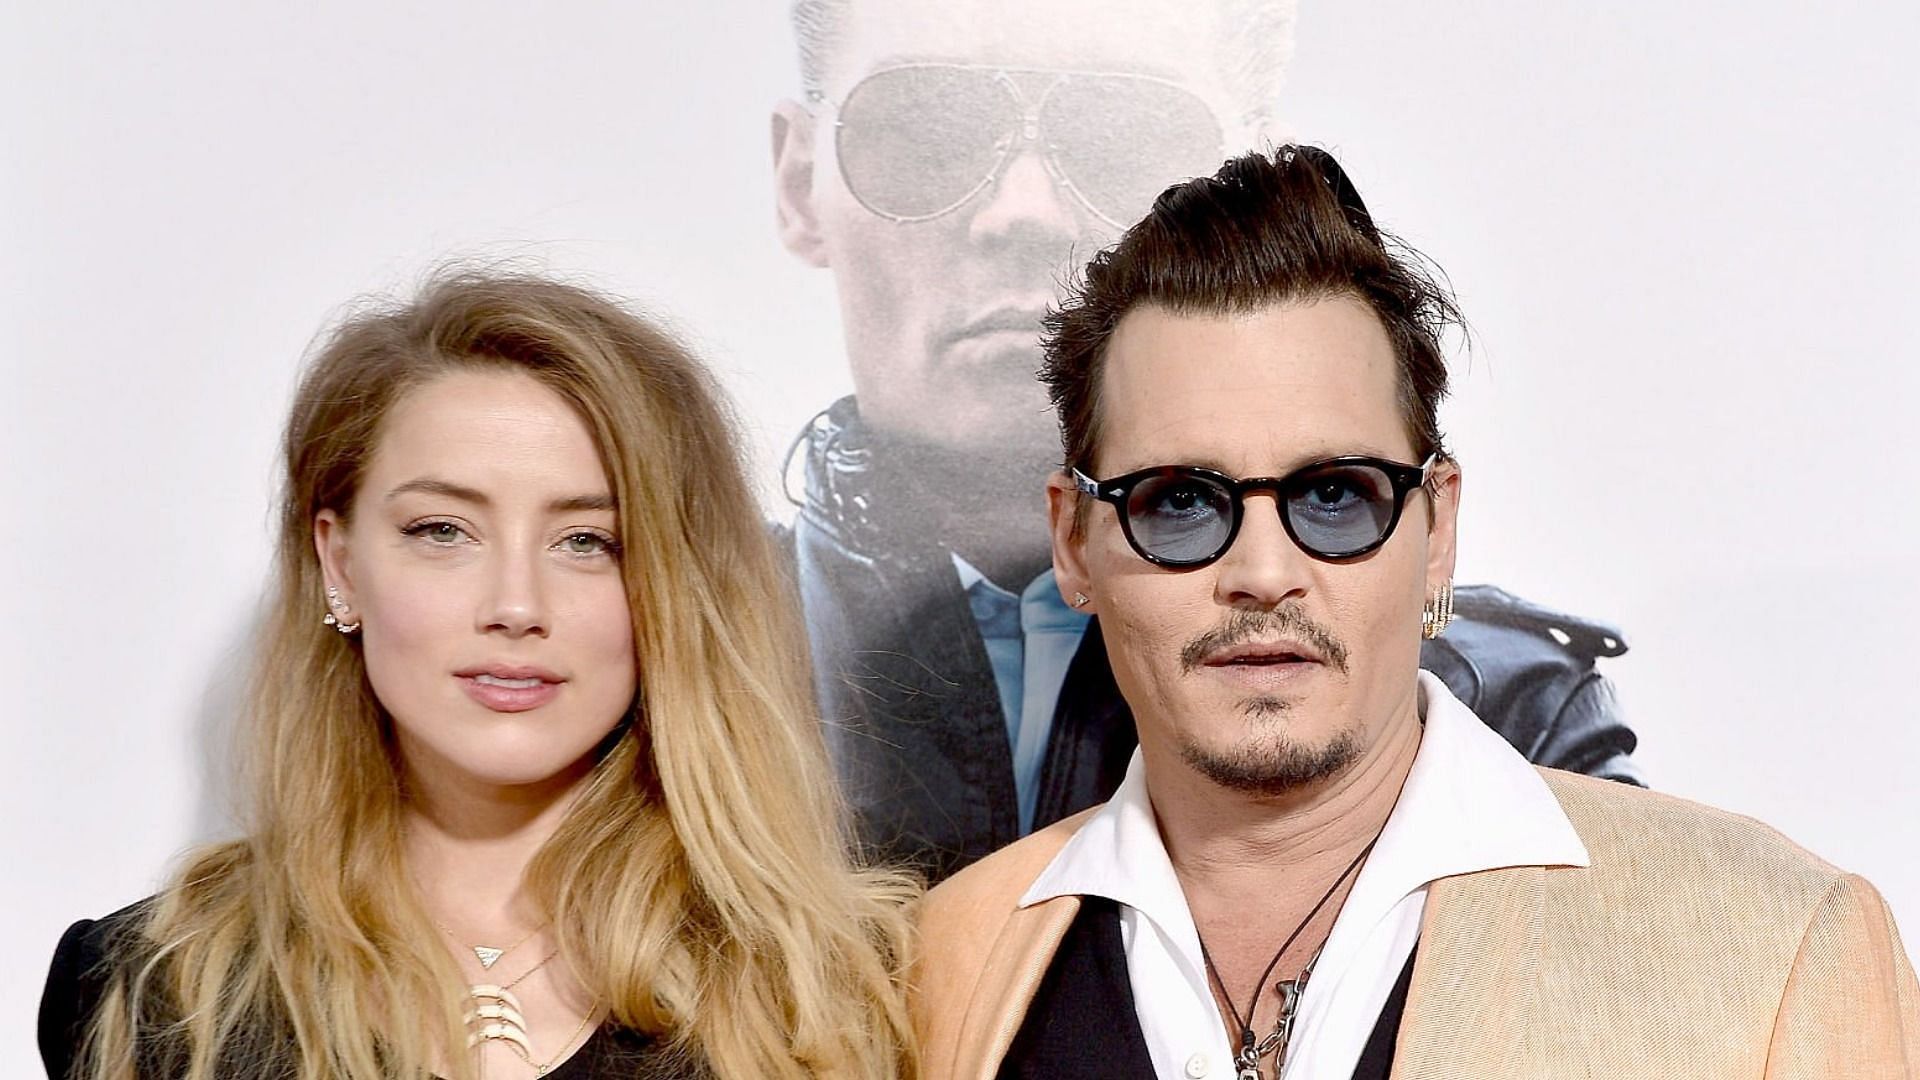 A ruling on jury instructions for Johnny Depp vs. Amber Heard trial was made on Thursday (Image via Getty Images)